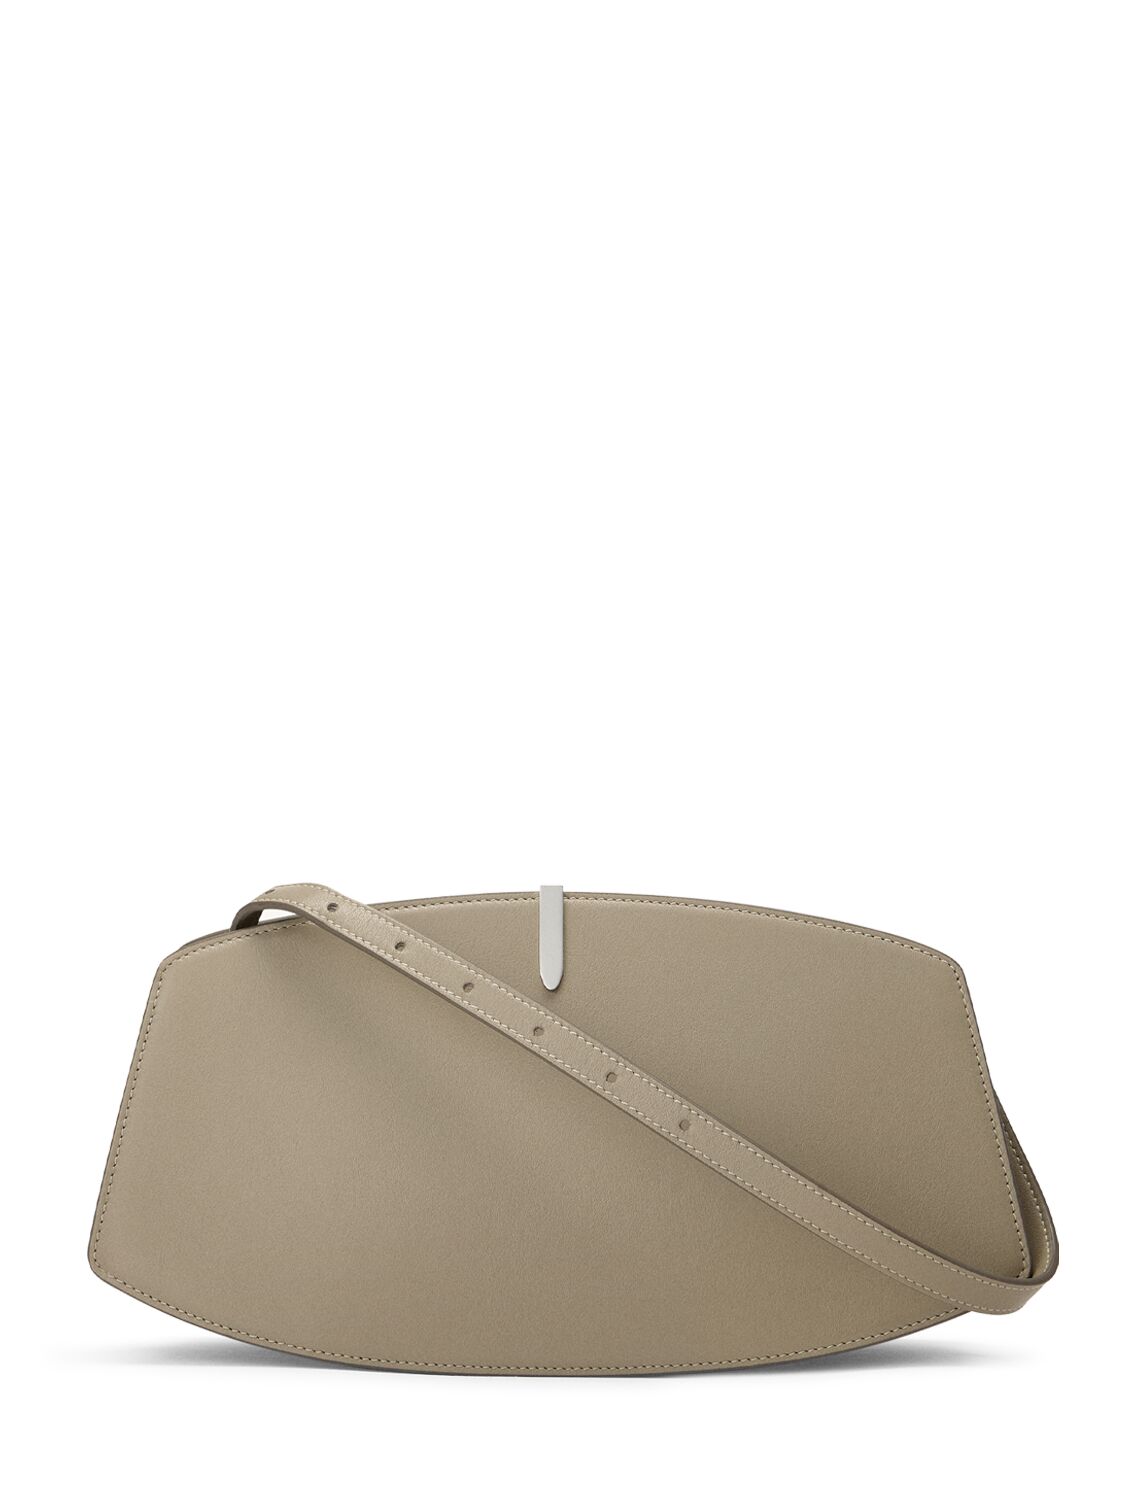 Savette Florence Leather Shoulder Bag In Clay